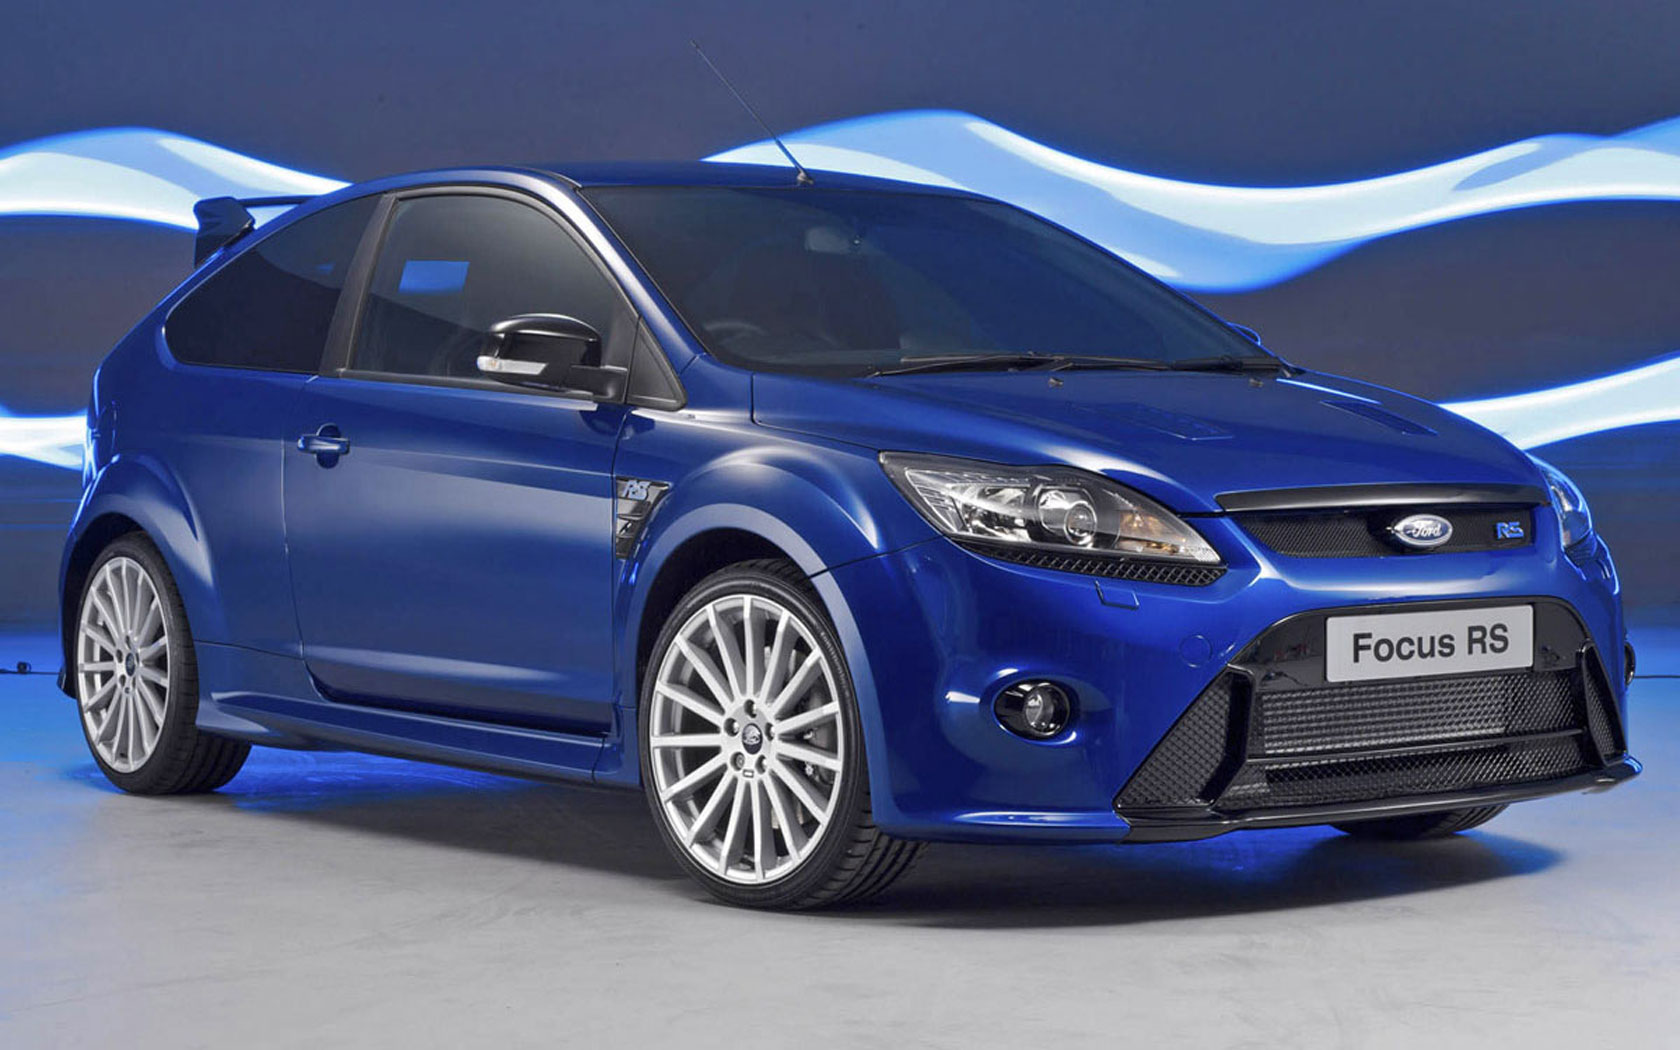  Ford Focus RS (2009-2011)